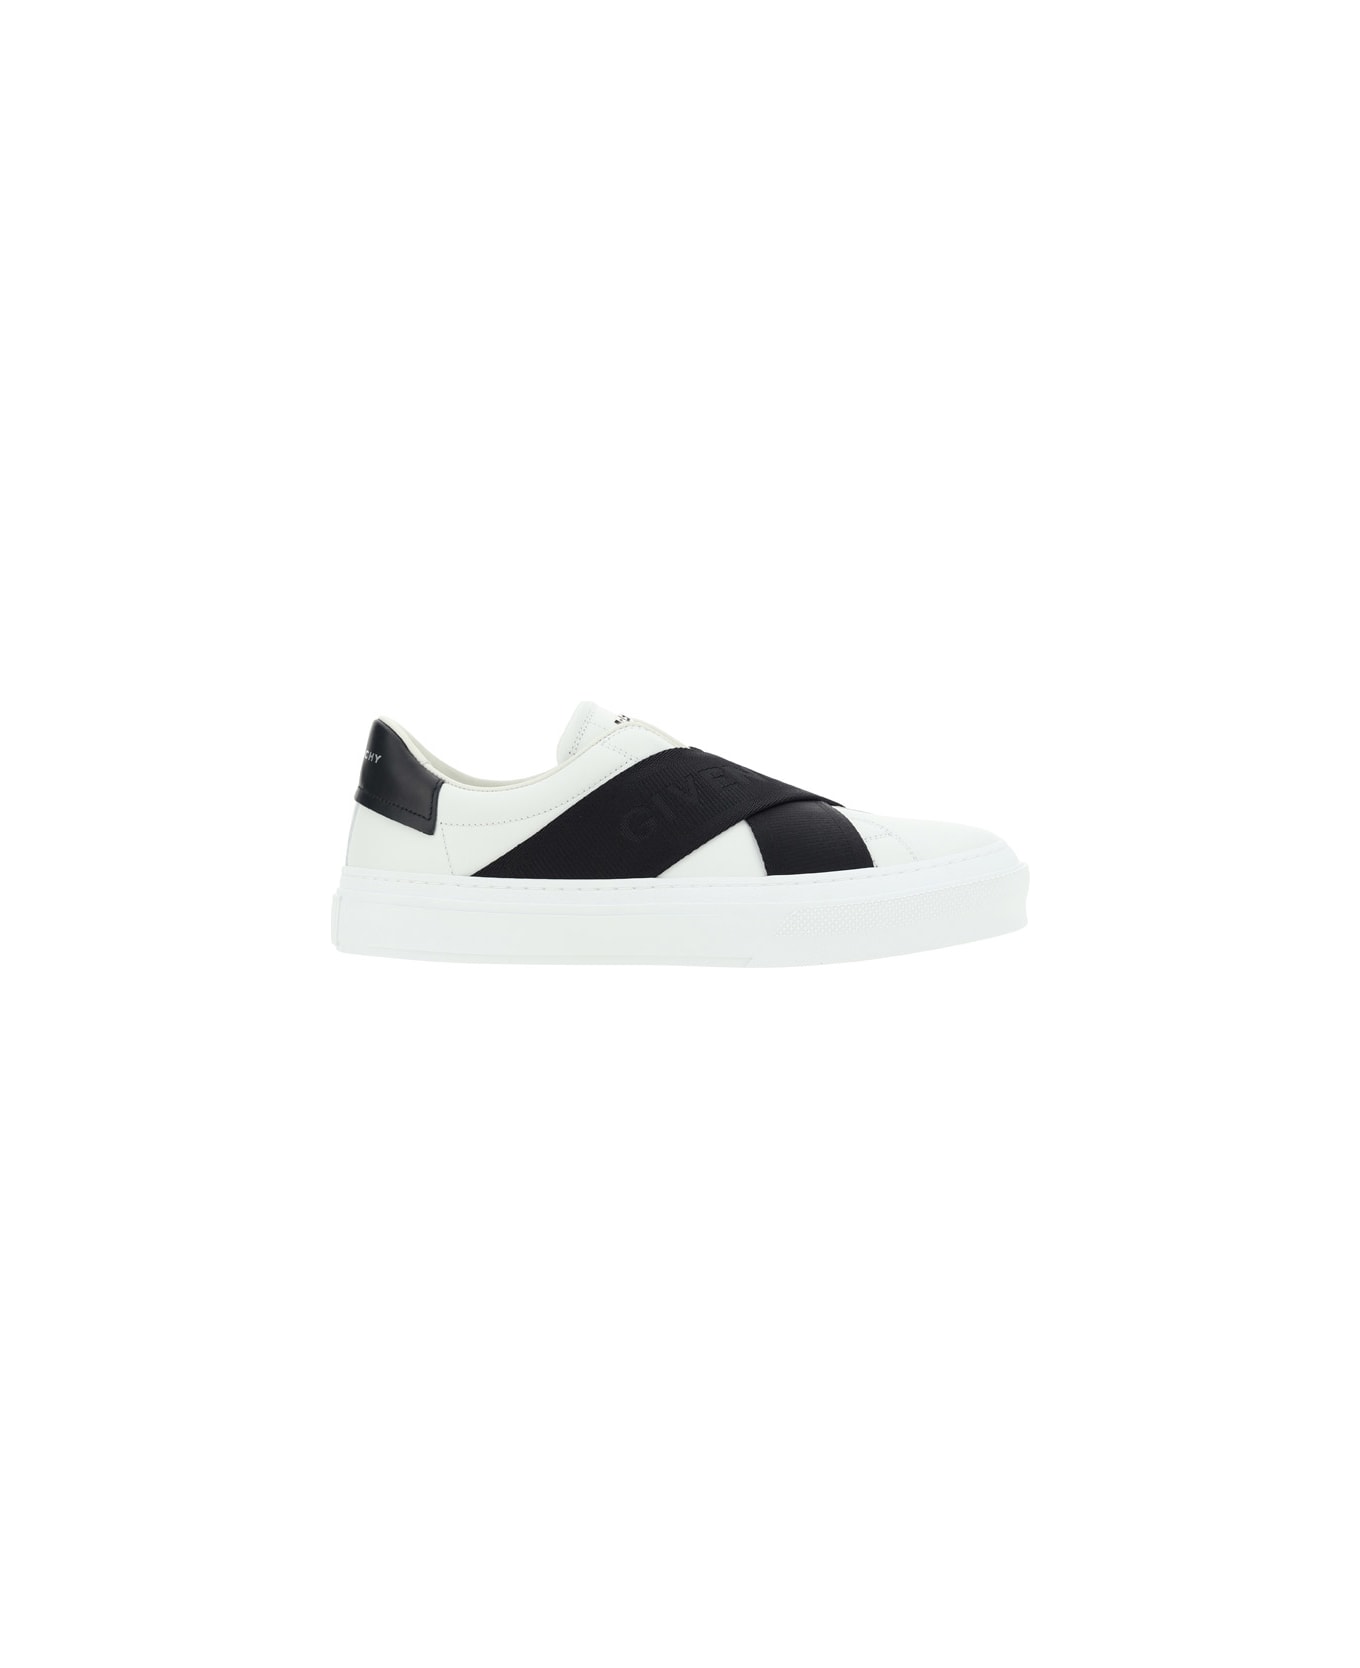 Givenchy City Sport Leather Sneakers - White/black スニーカー